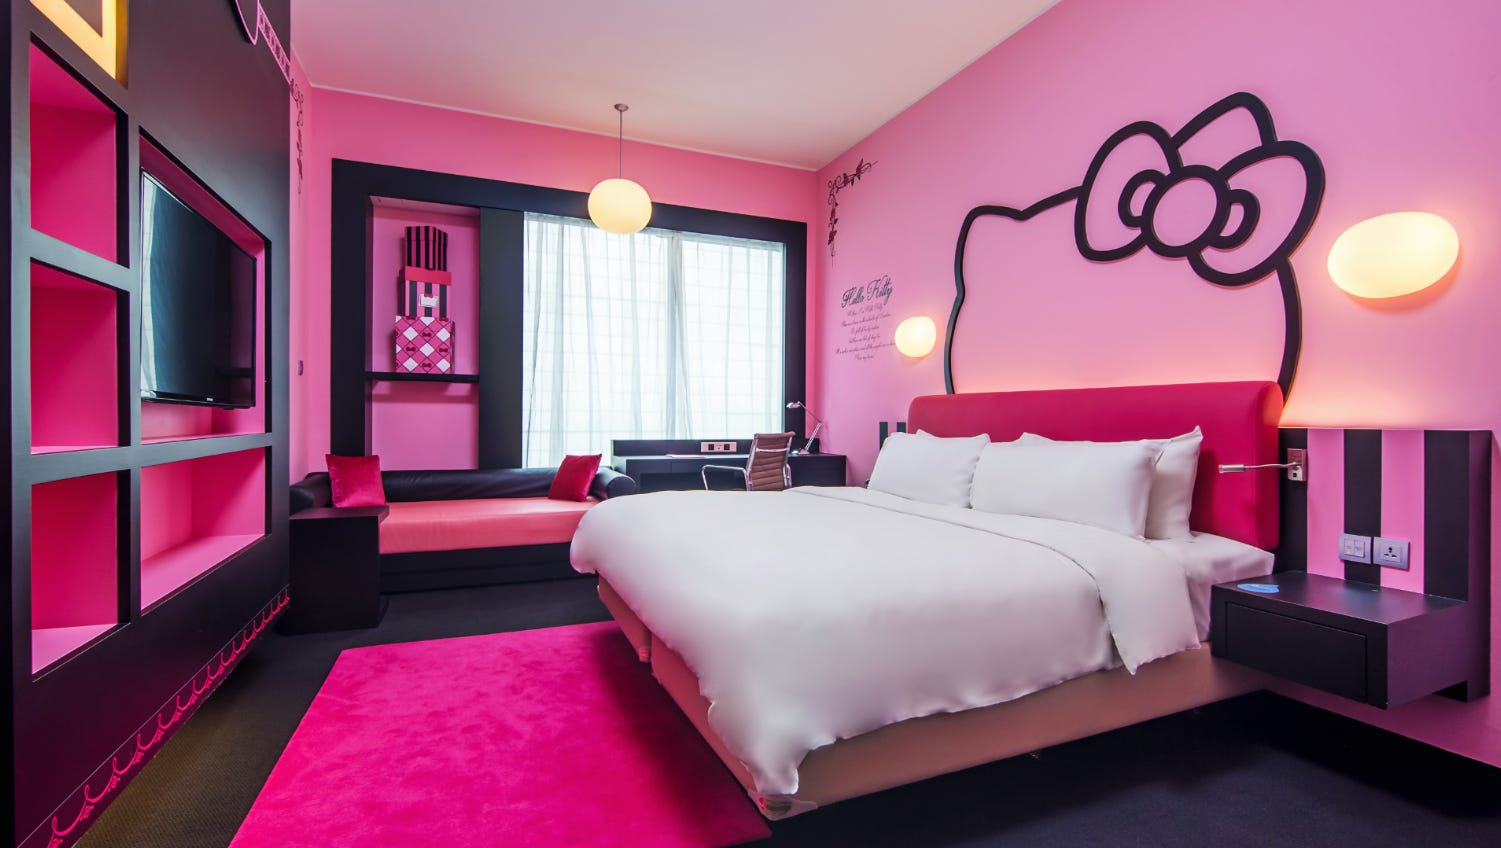 Hotels Quirky Rooms Inspired By Cartoons And Comics 